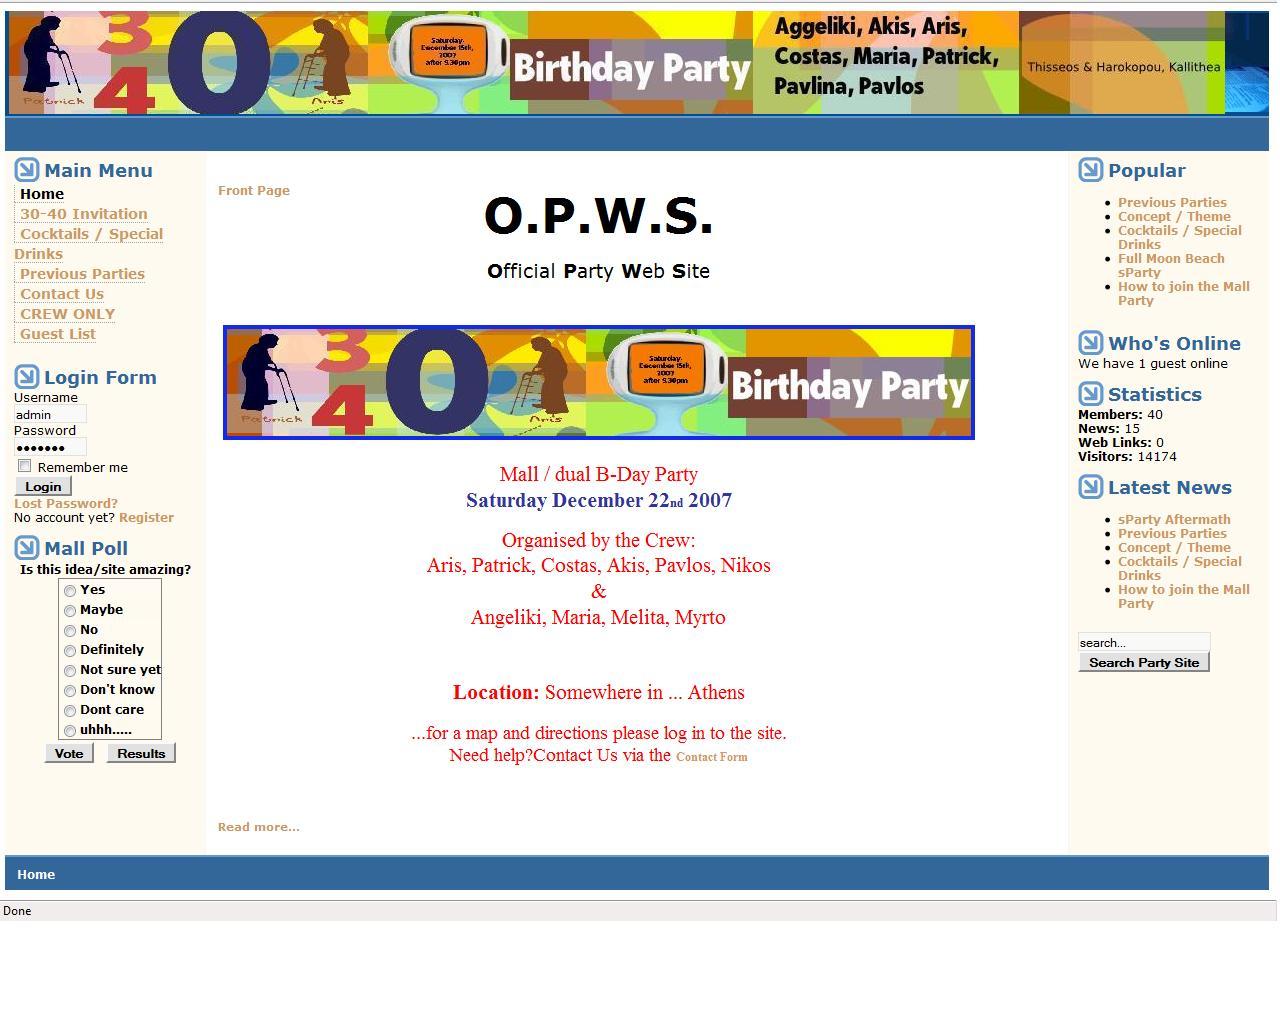 Event: 30-40 B-day Party Site